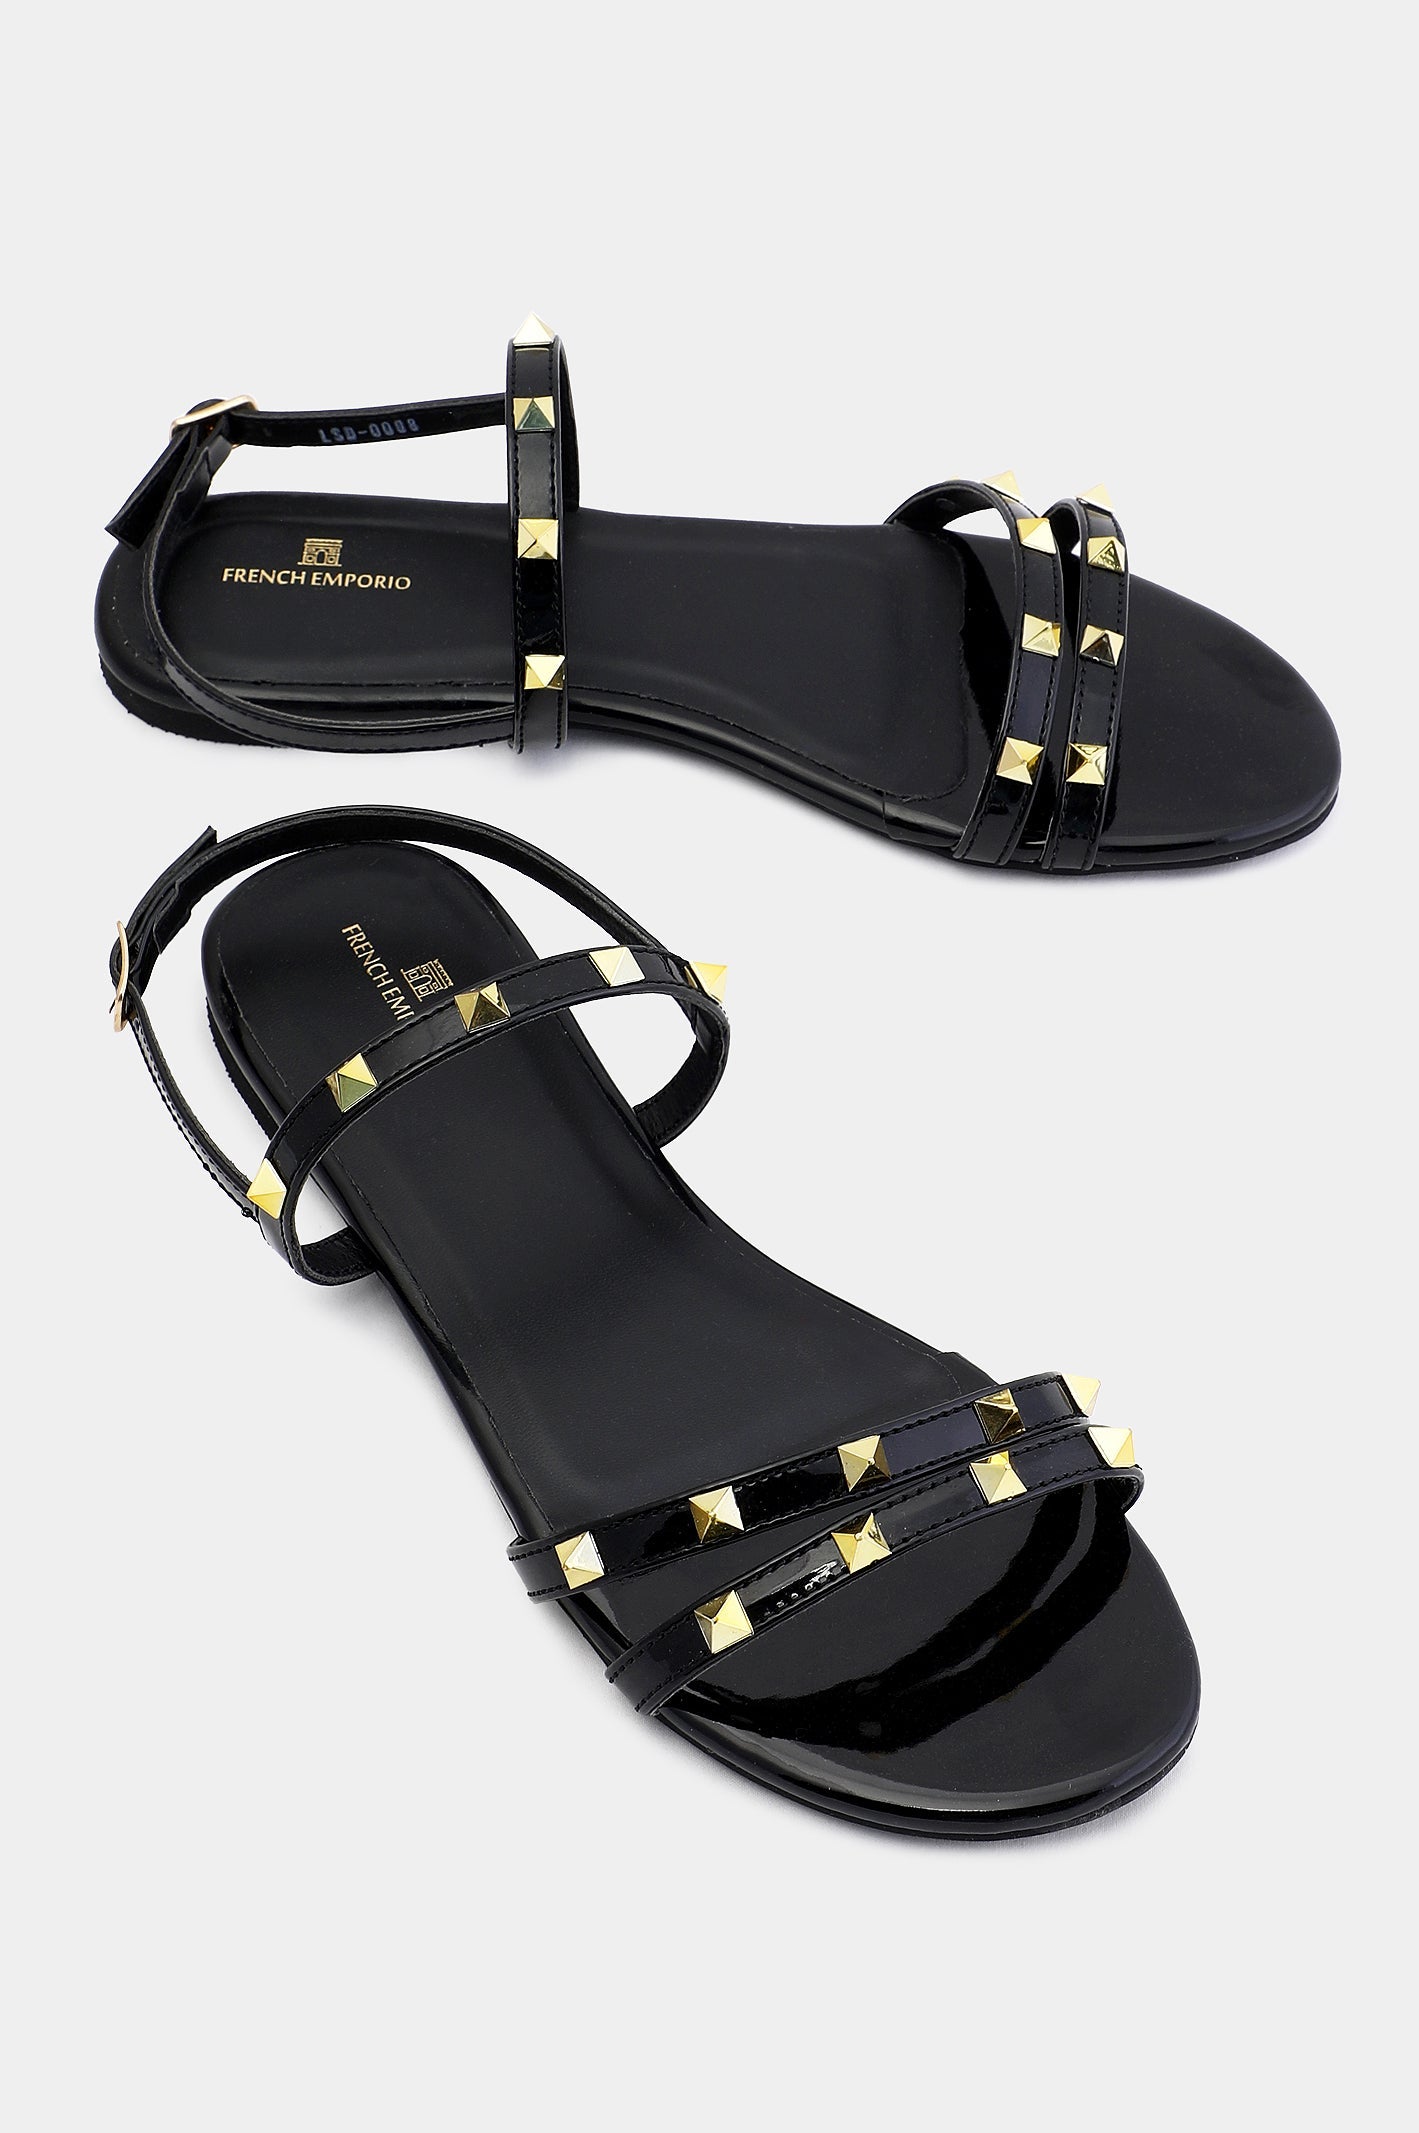 Black Ladies Formal Sandals From French Emporio By Diners